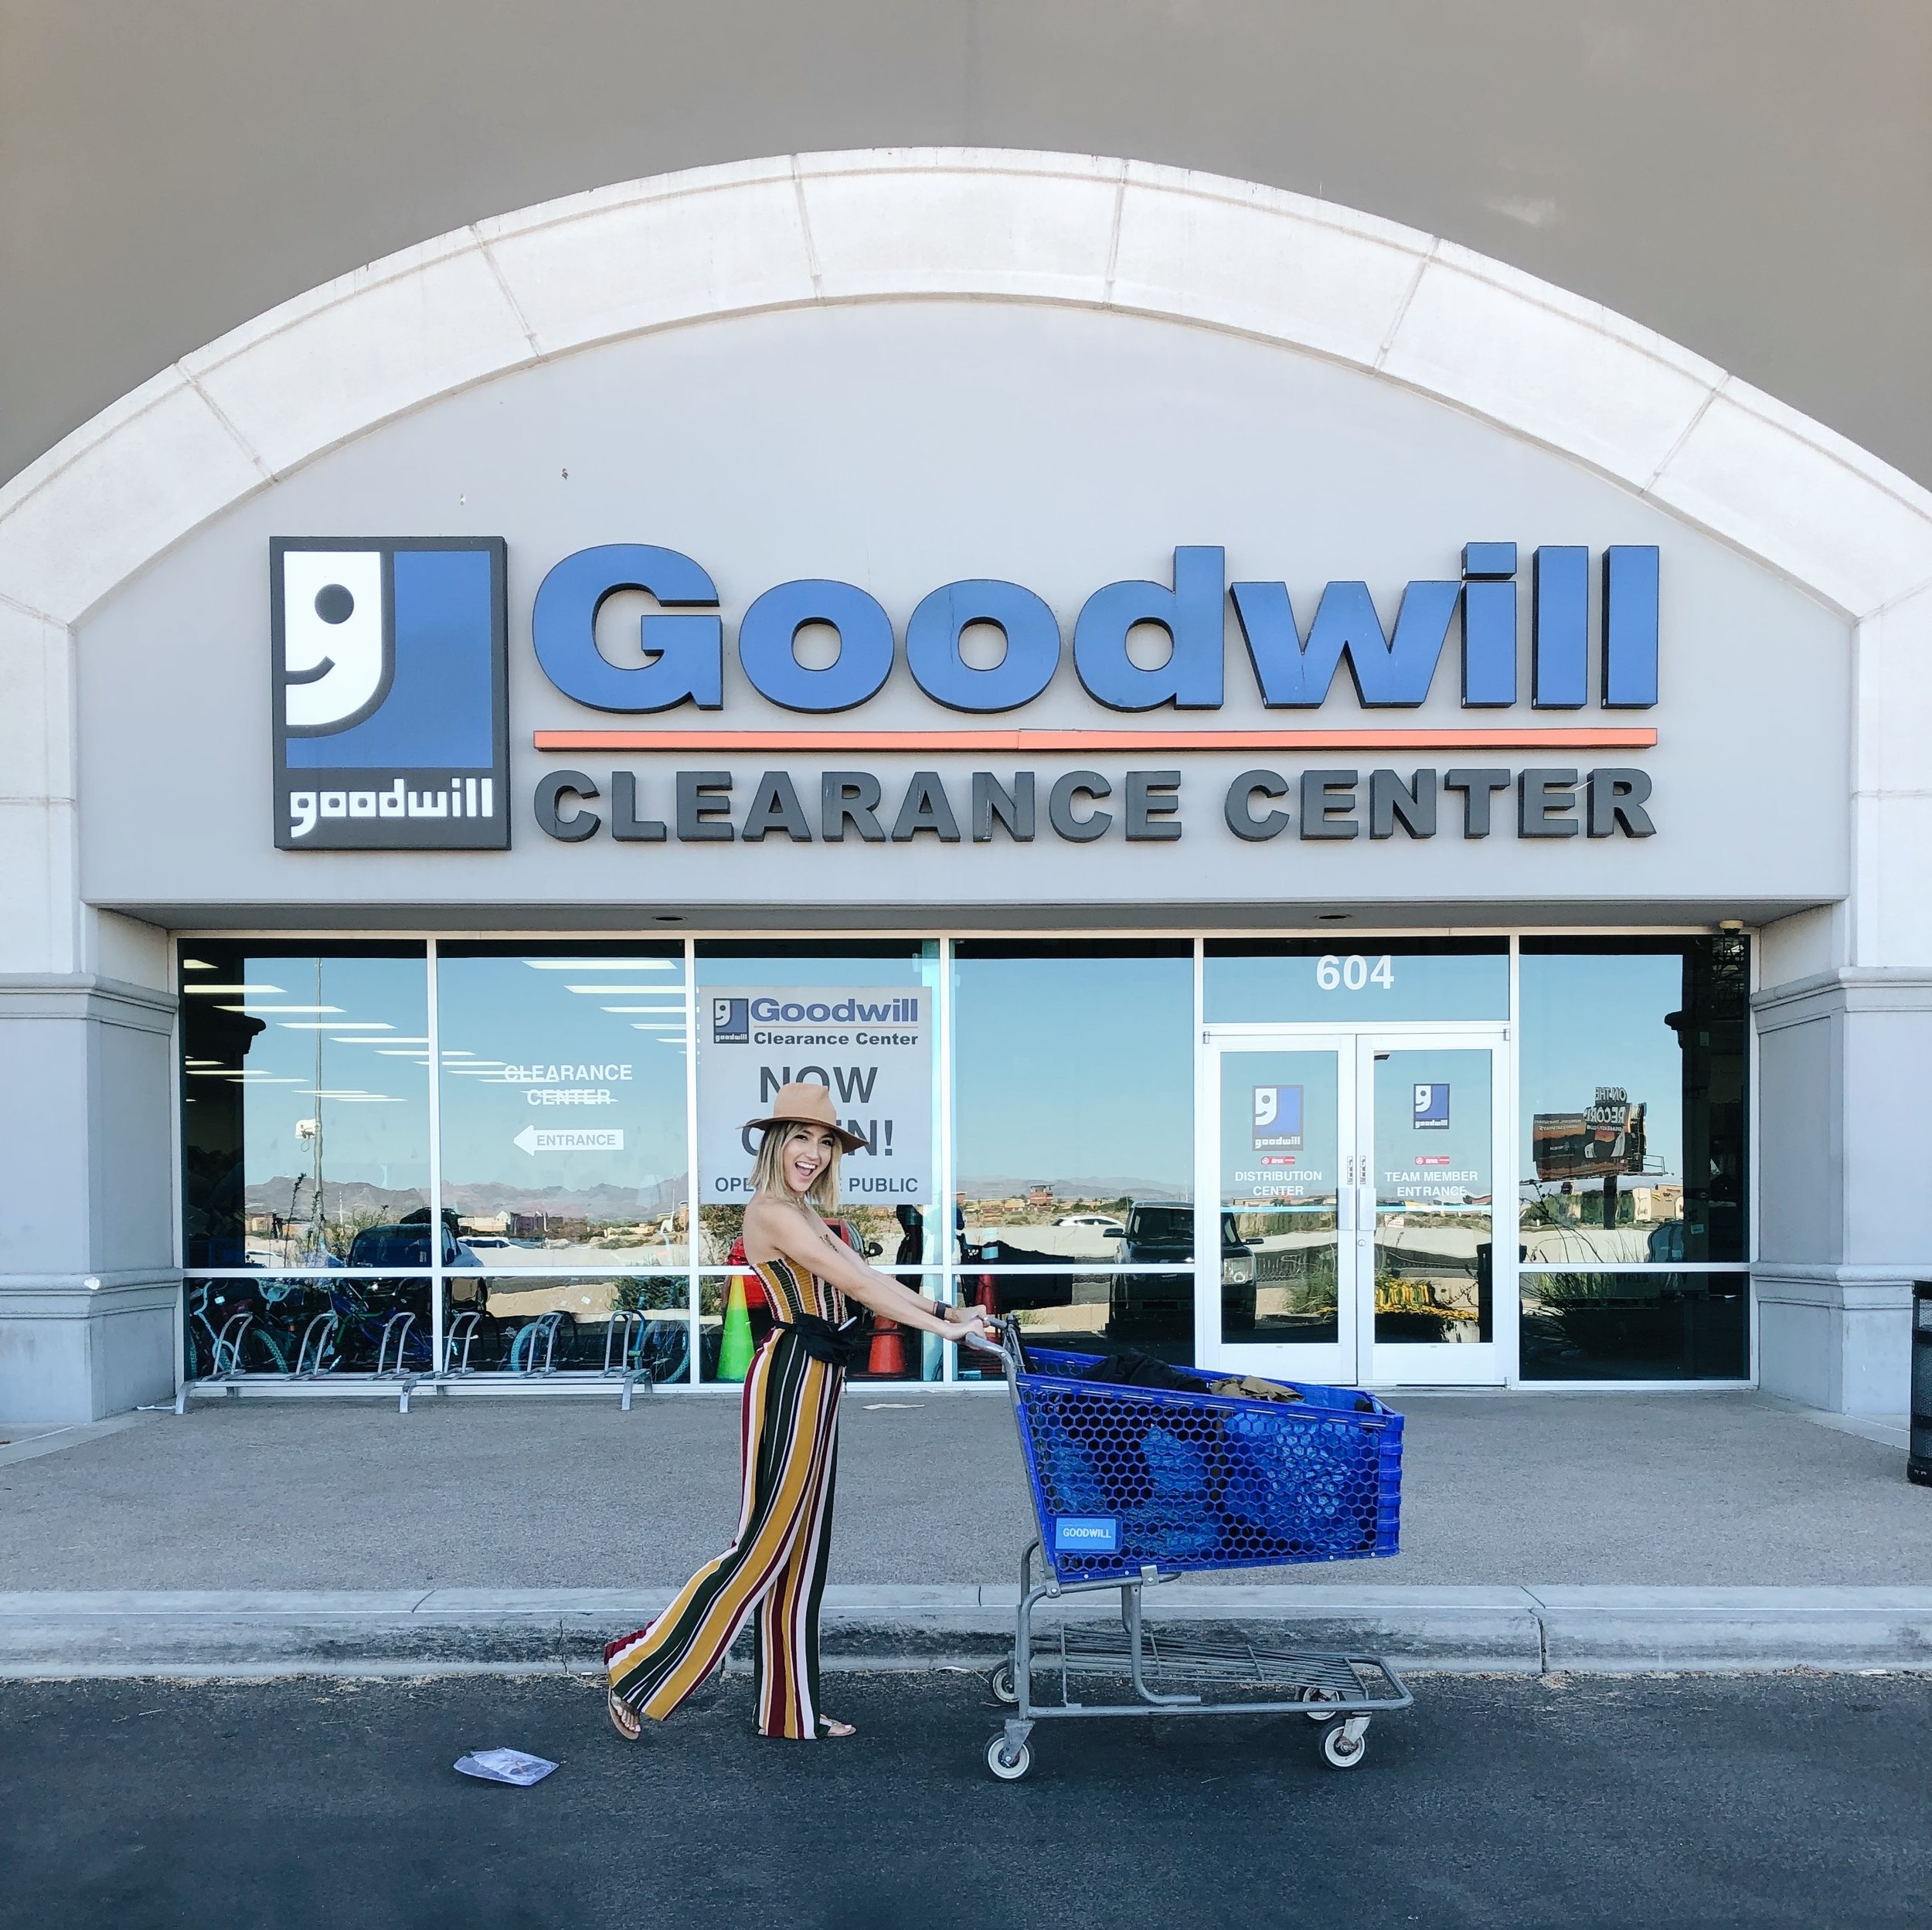 Thrift & Secondhand Stores Near You in Las Vegas, NV 89119